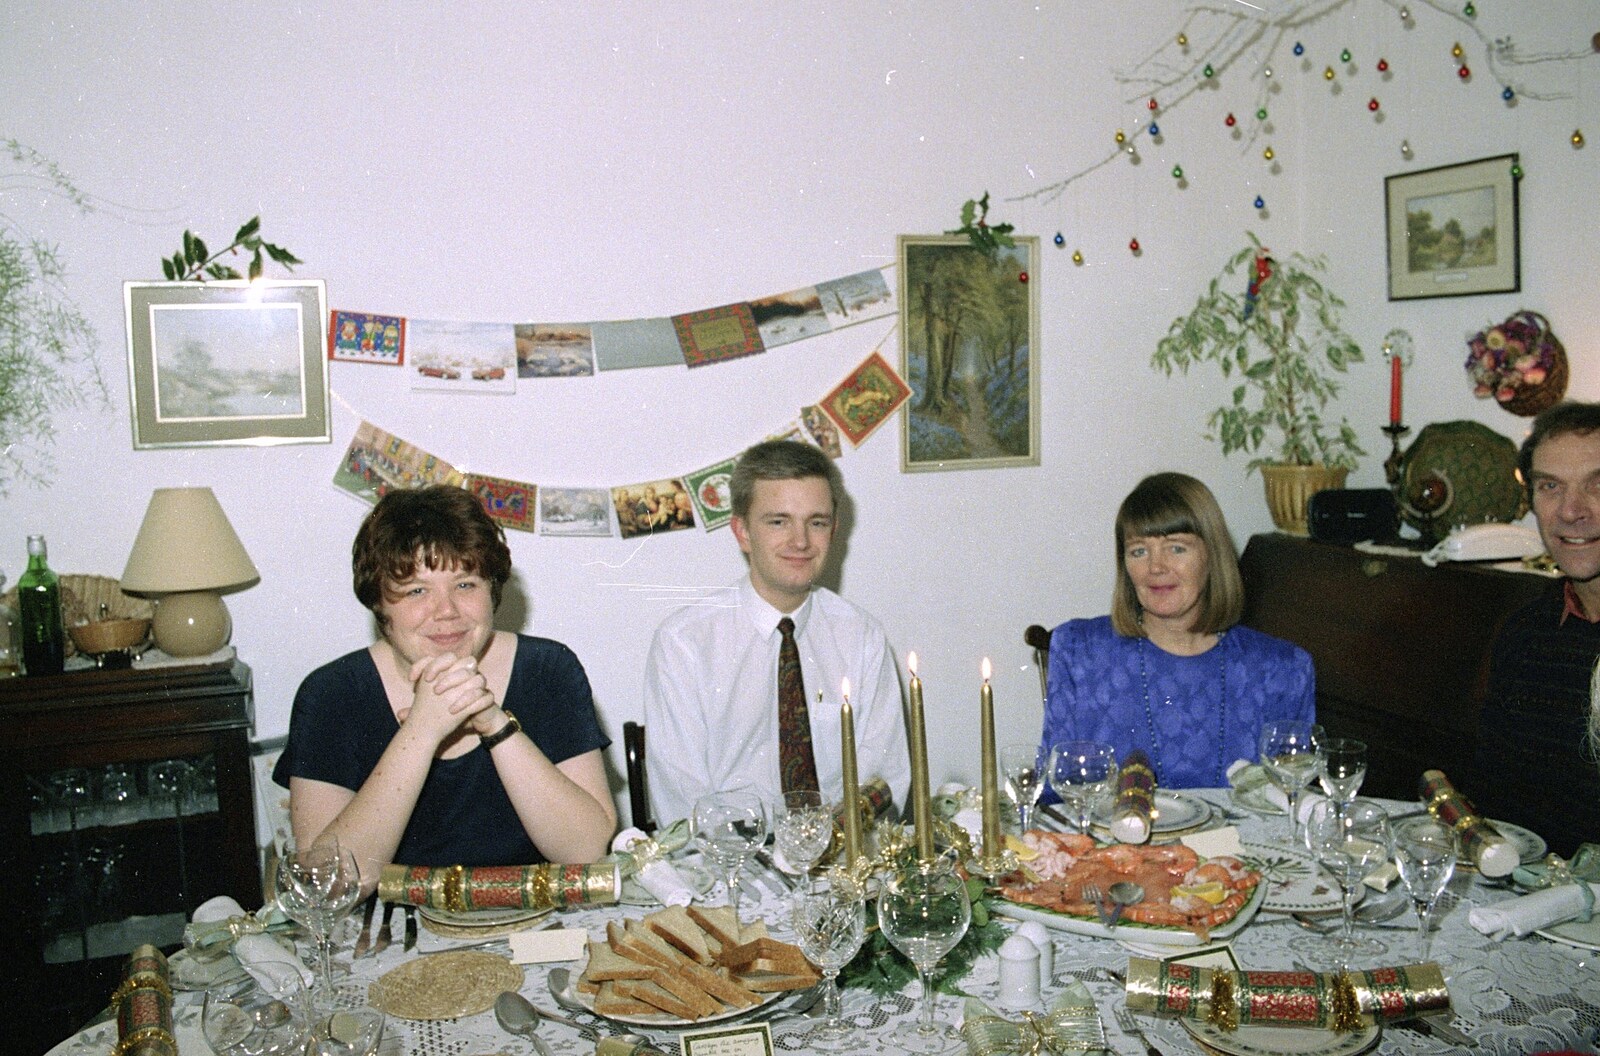 Sis, Nosher, Mother and a bit of Mike from Christmas Down South, Burton and Walkford, Dorset - 25th December 1994